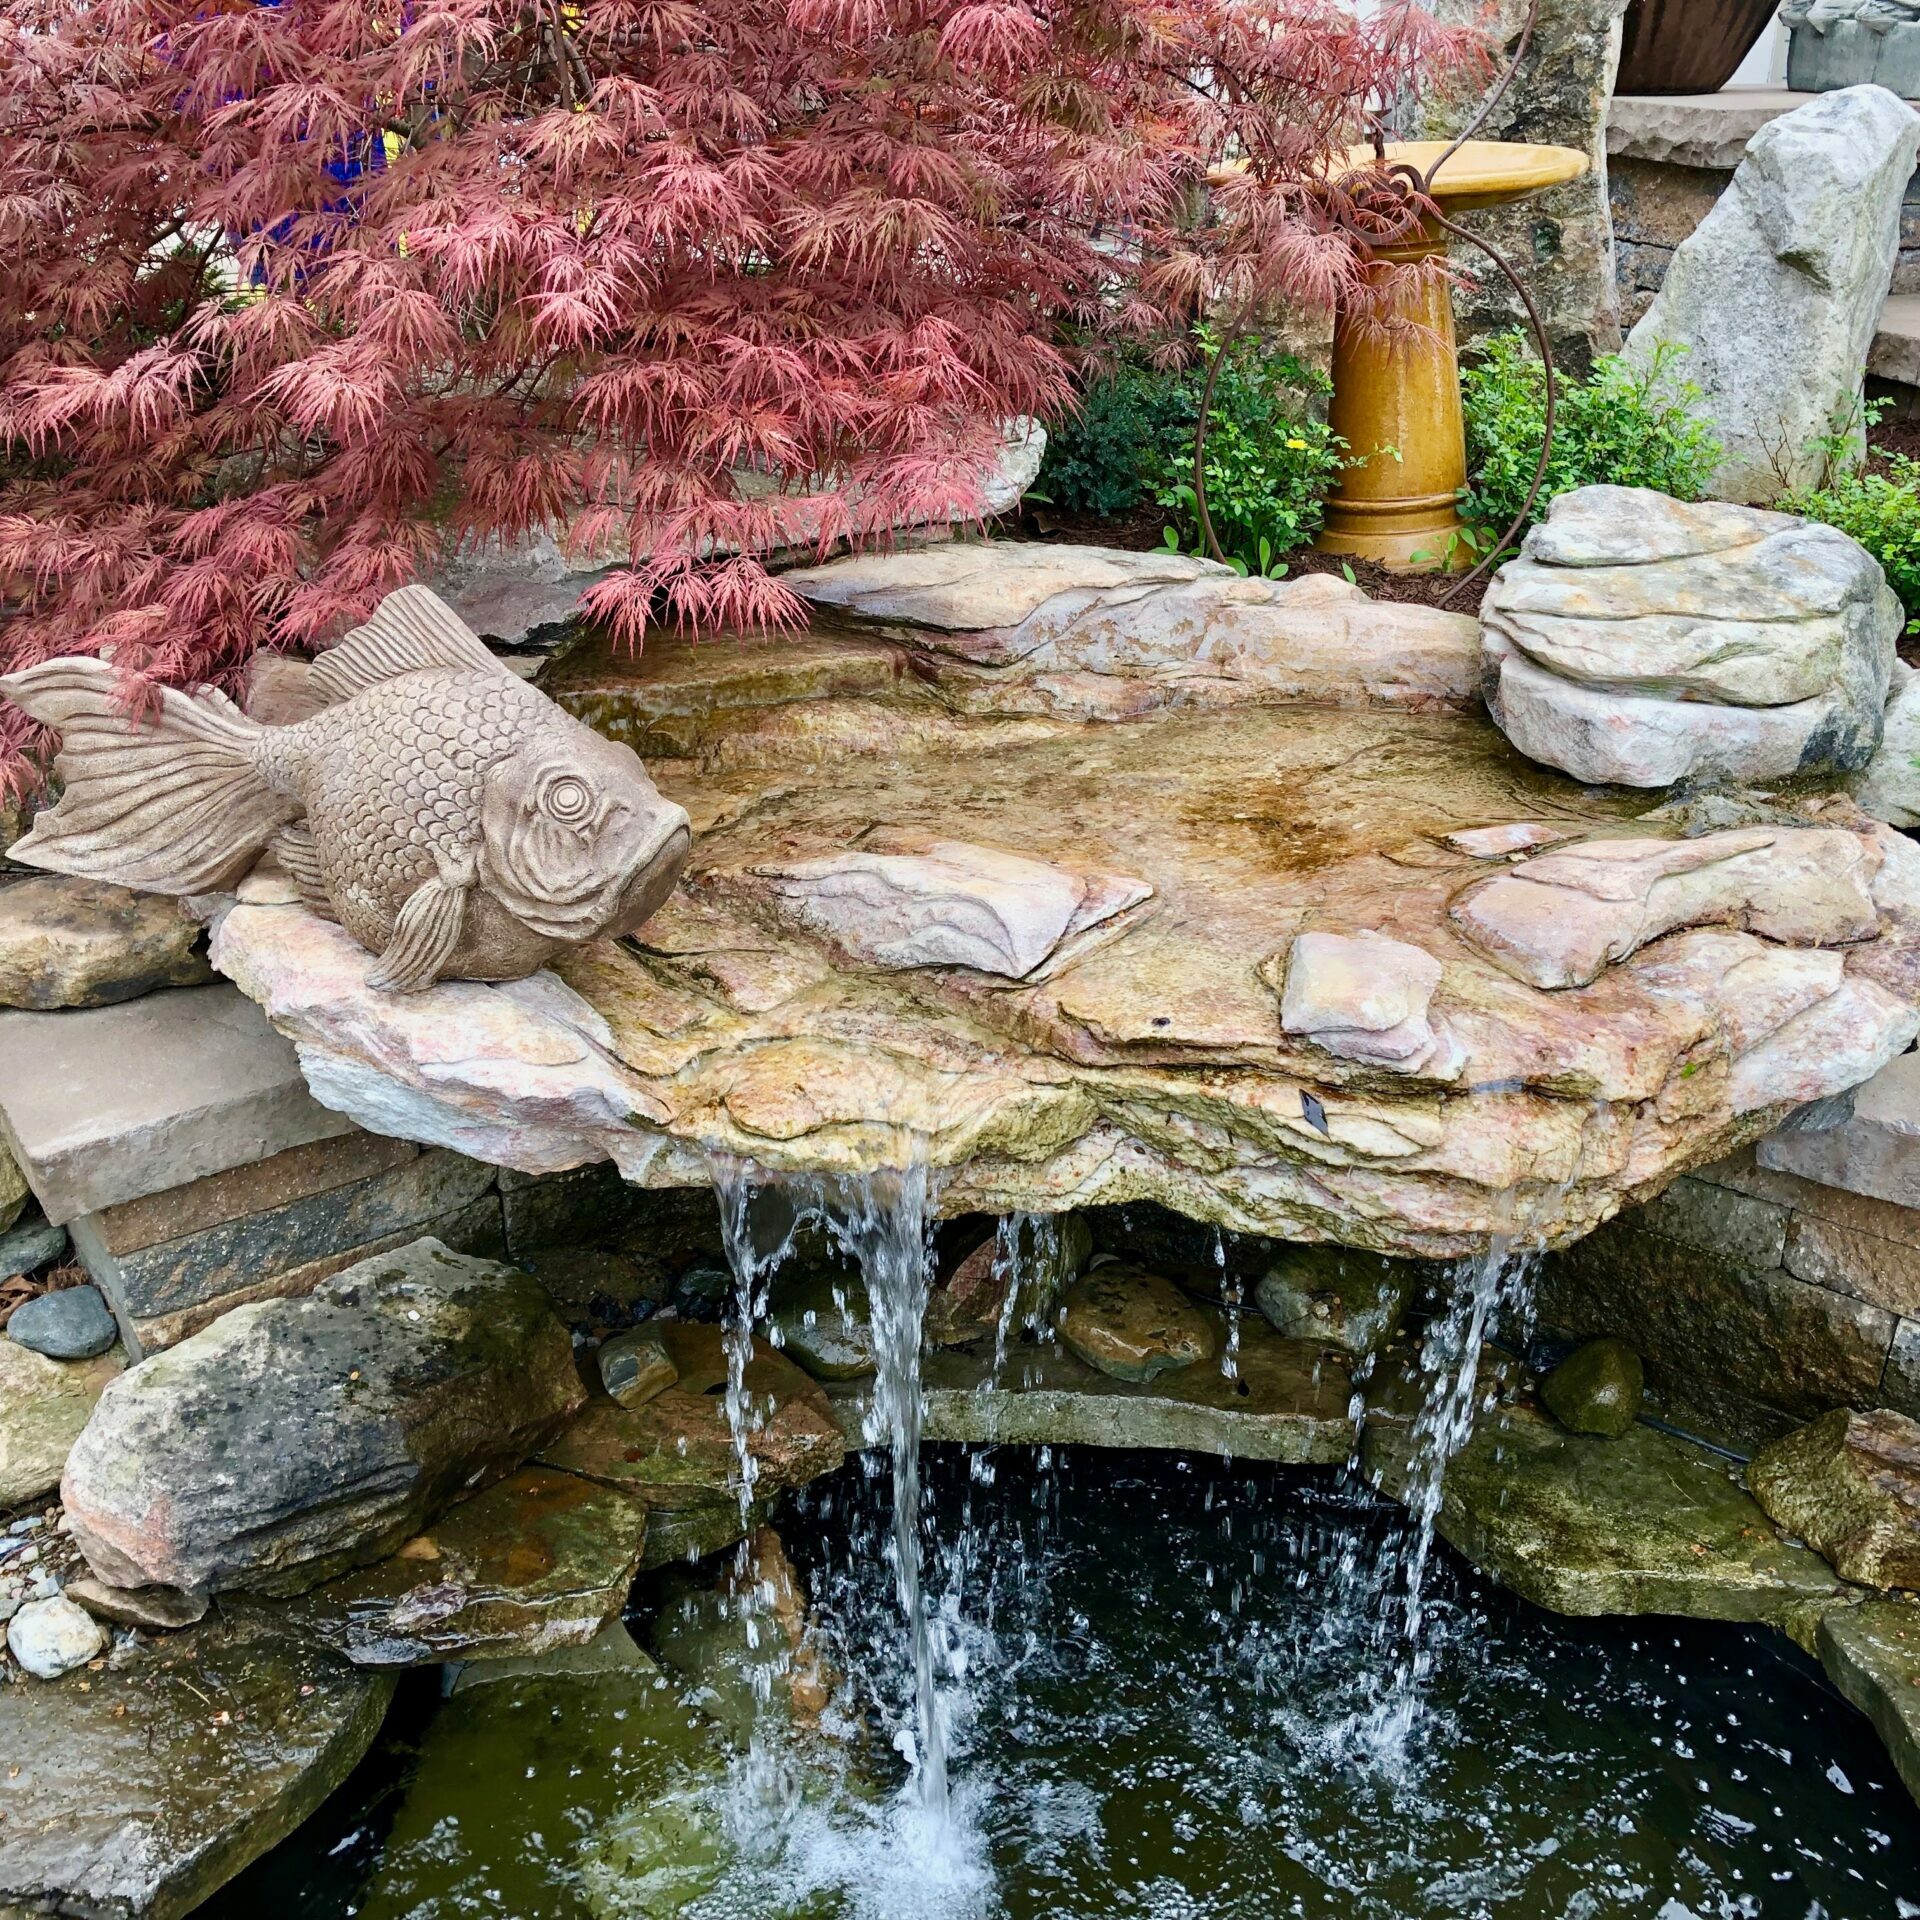 a-beautiful-landscaped-water-feature-provides-a-t-2022-11-04-23-31-16-utc (1)